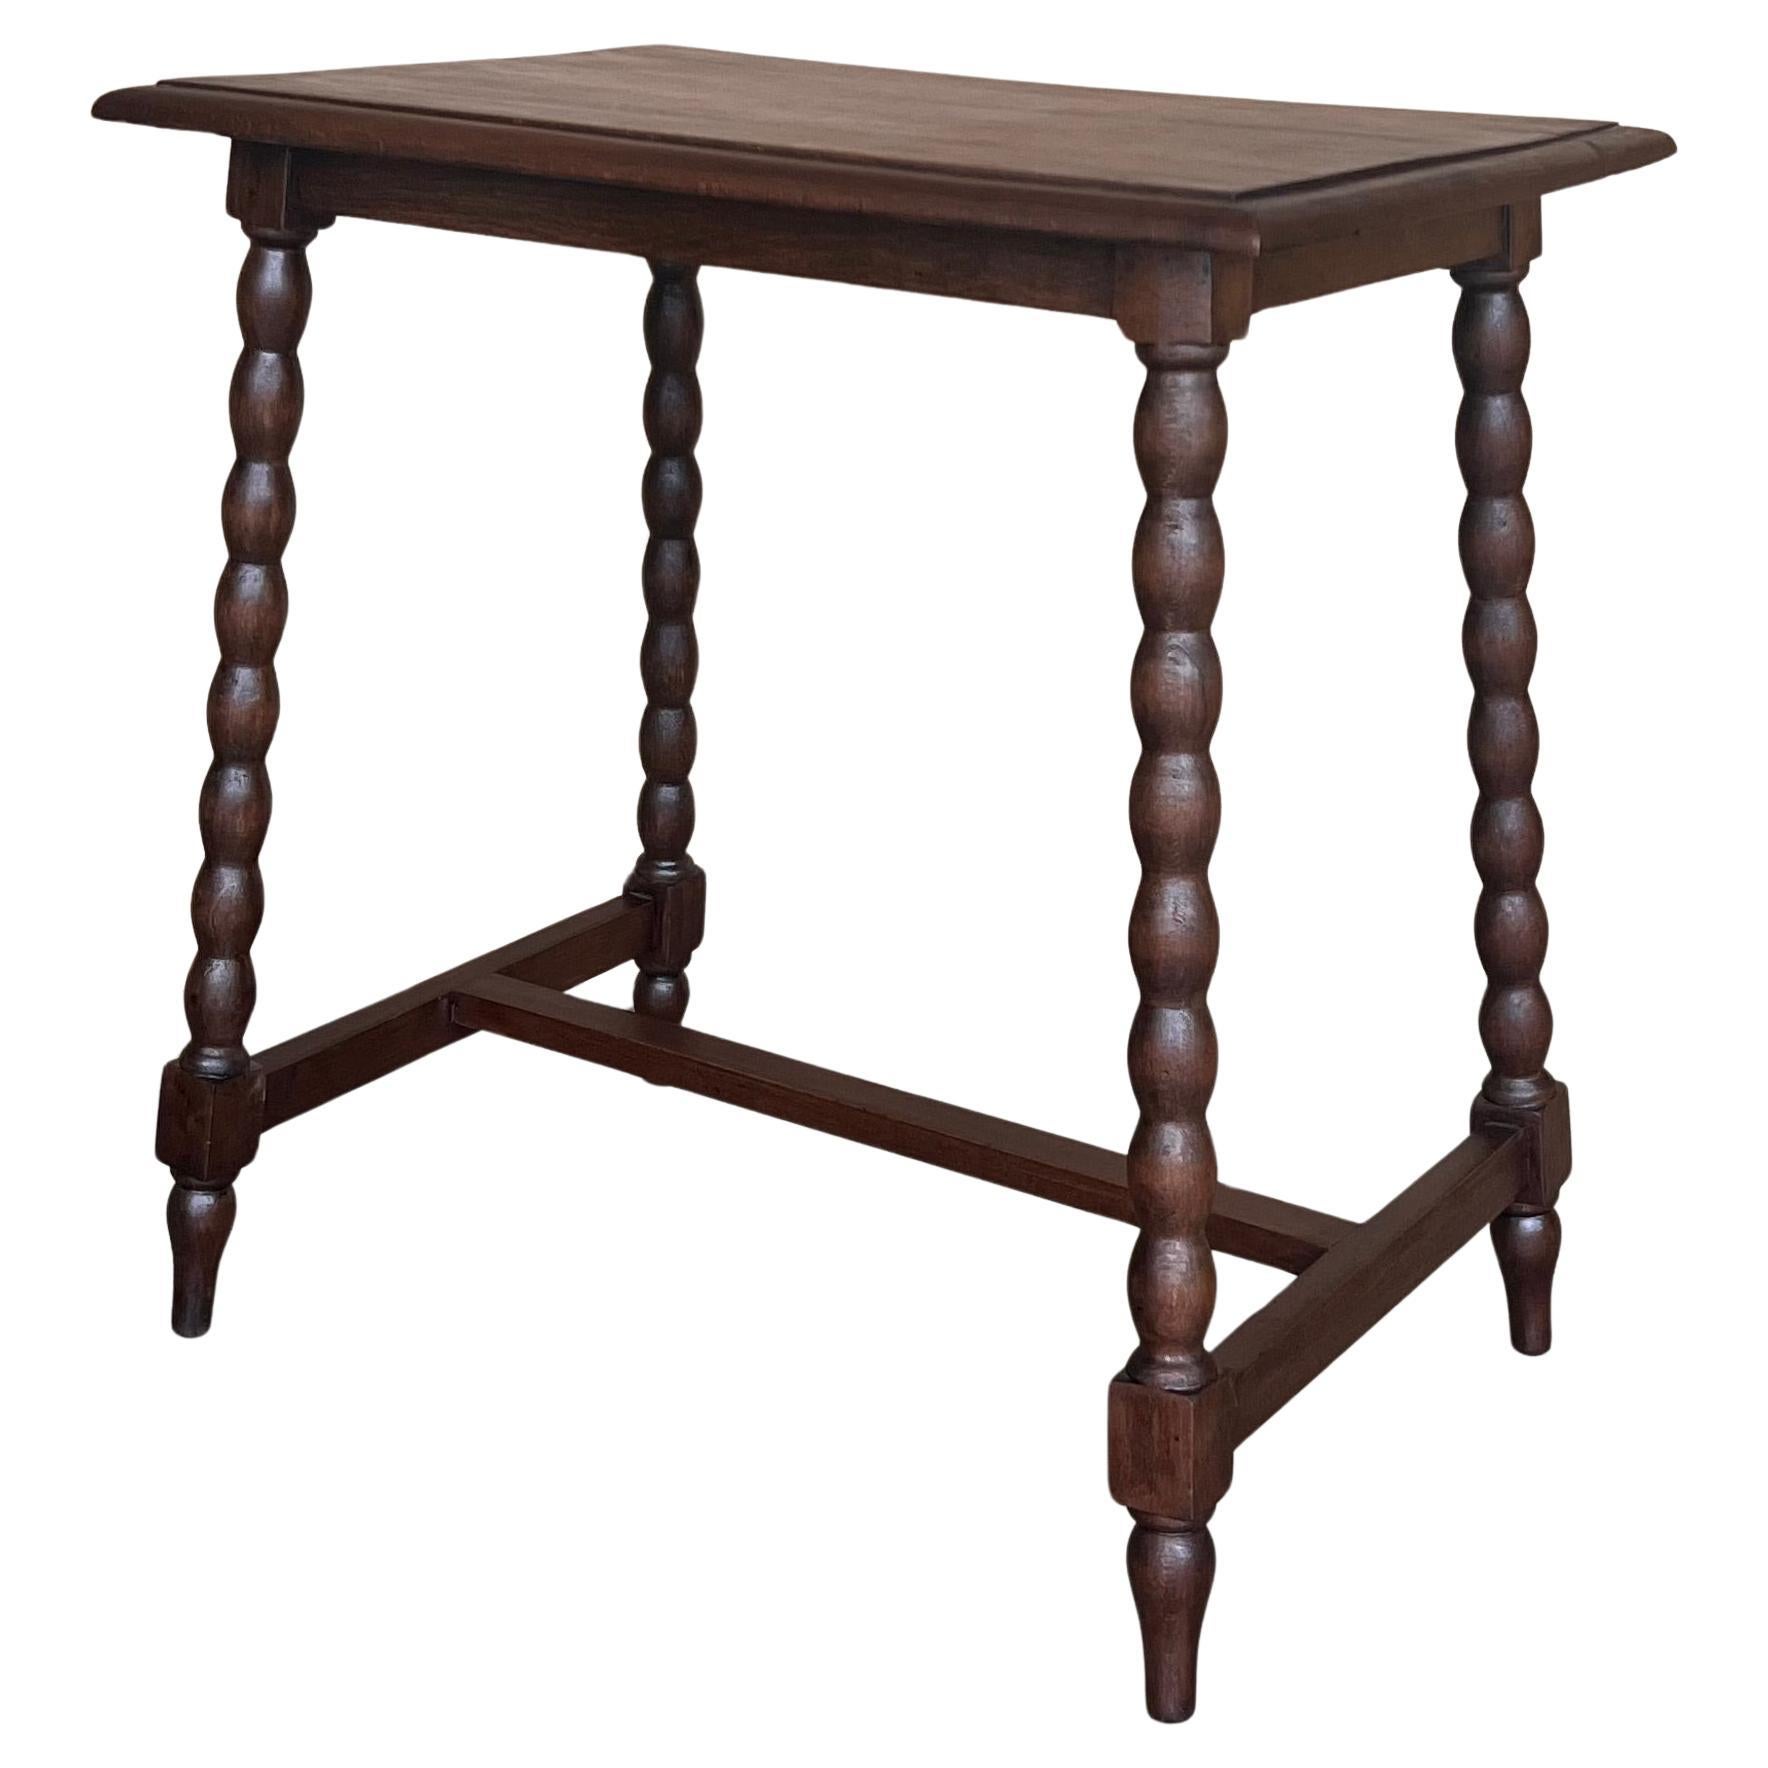 19th Spanish Walnut Side Table with Turned Legs and Iron Stretcher